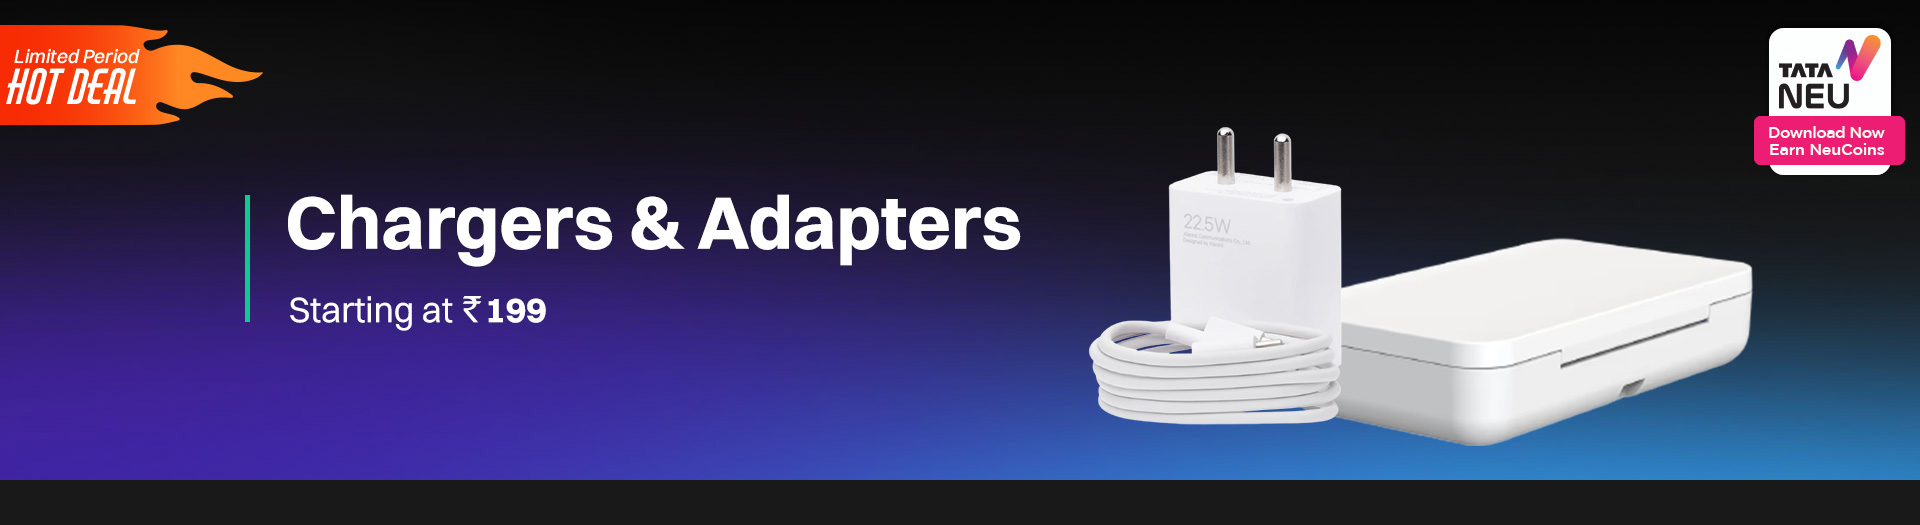 croma.com - Chargers and adapters